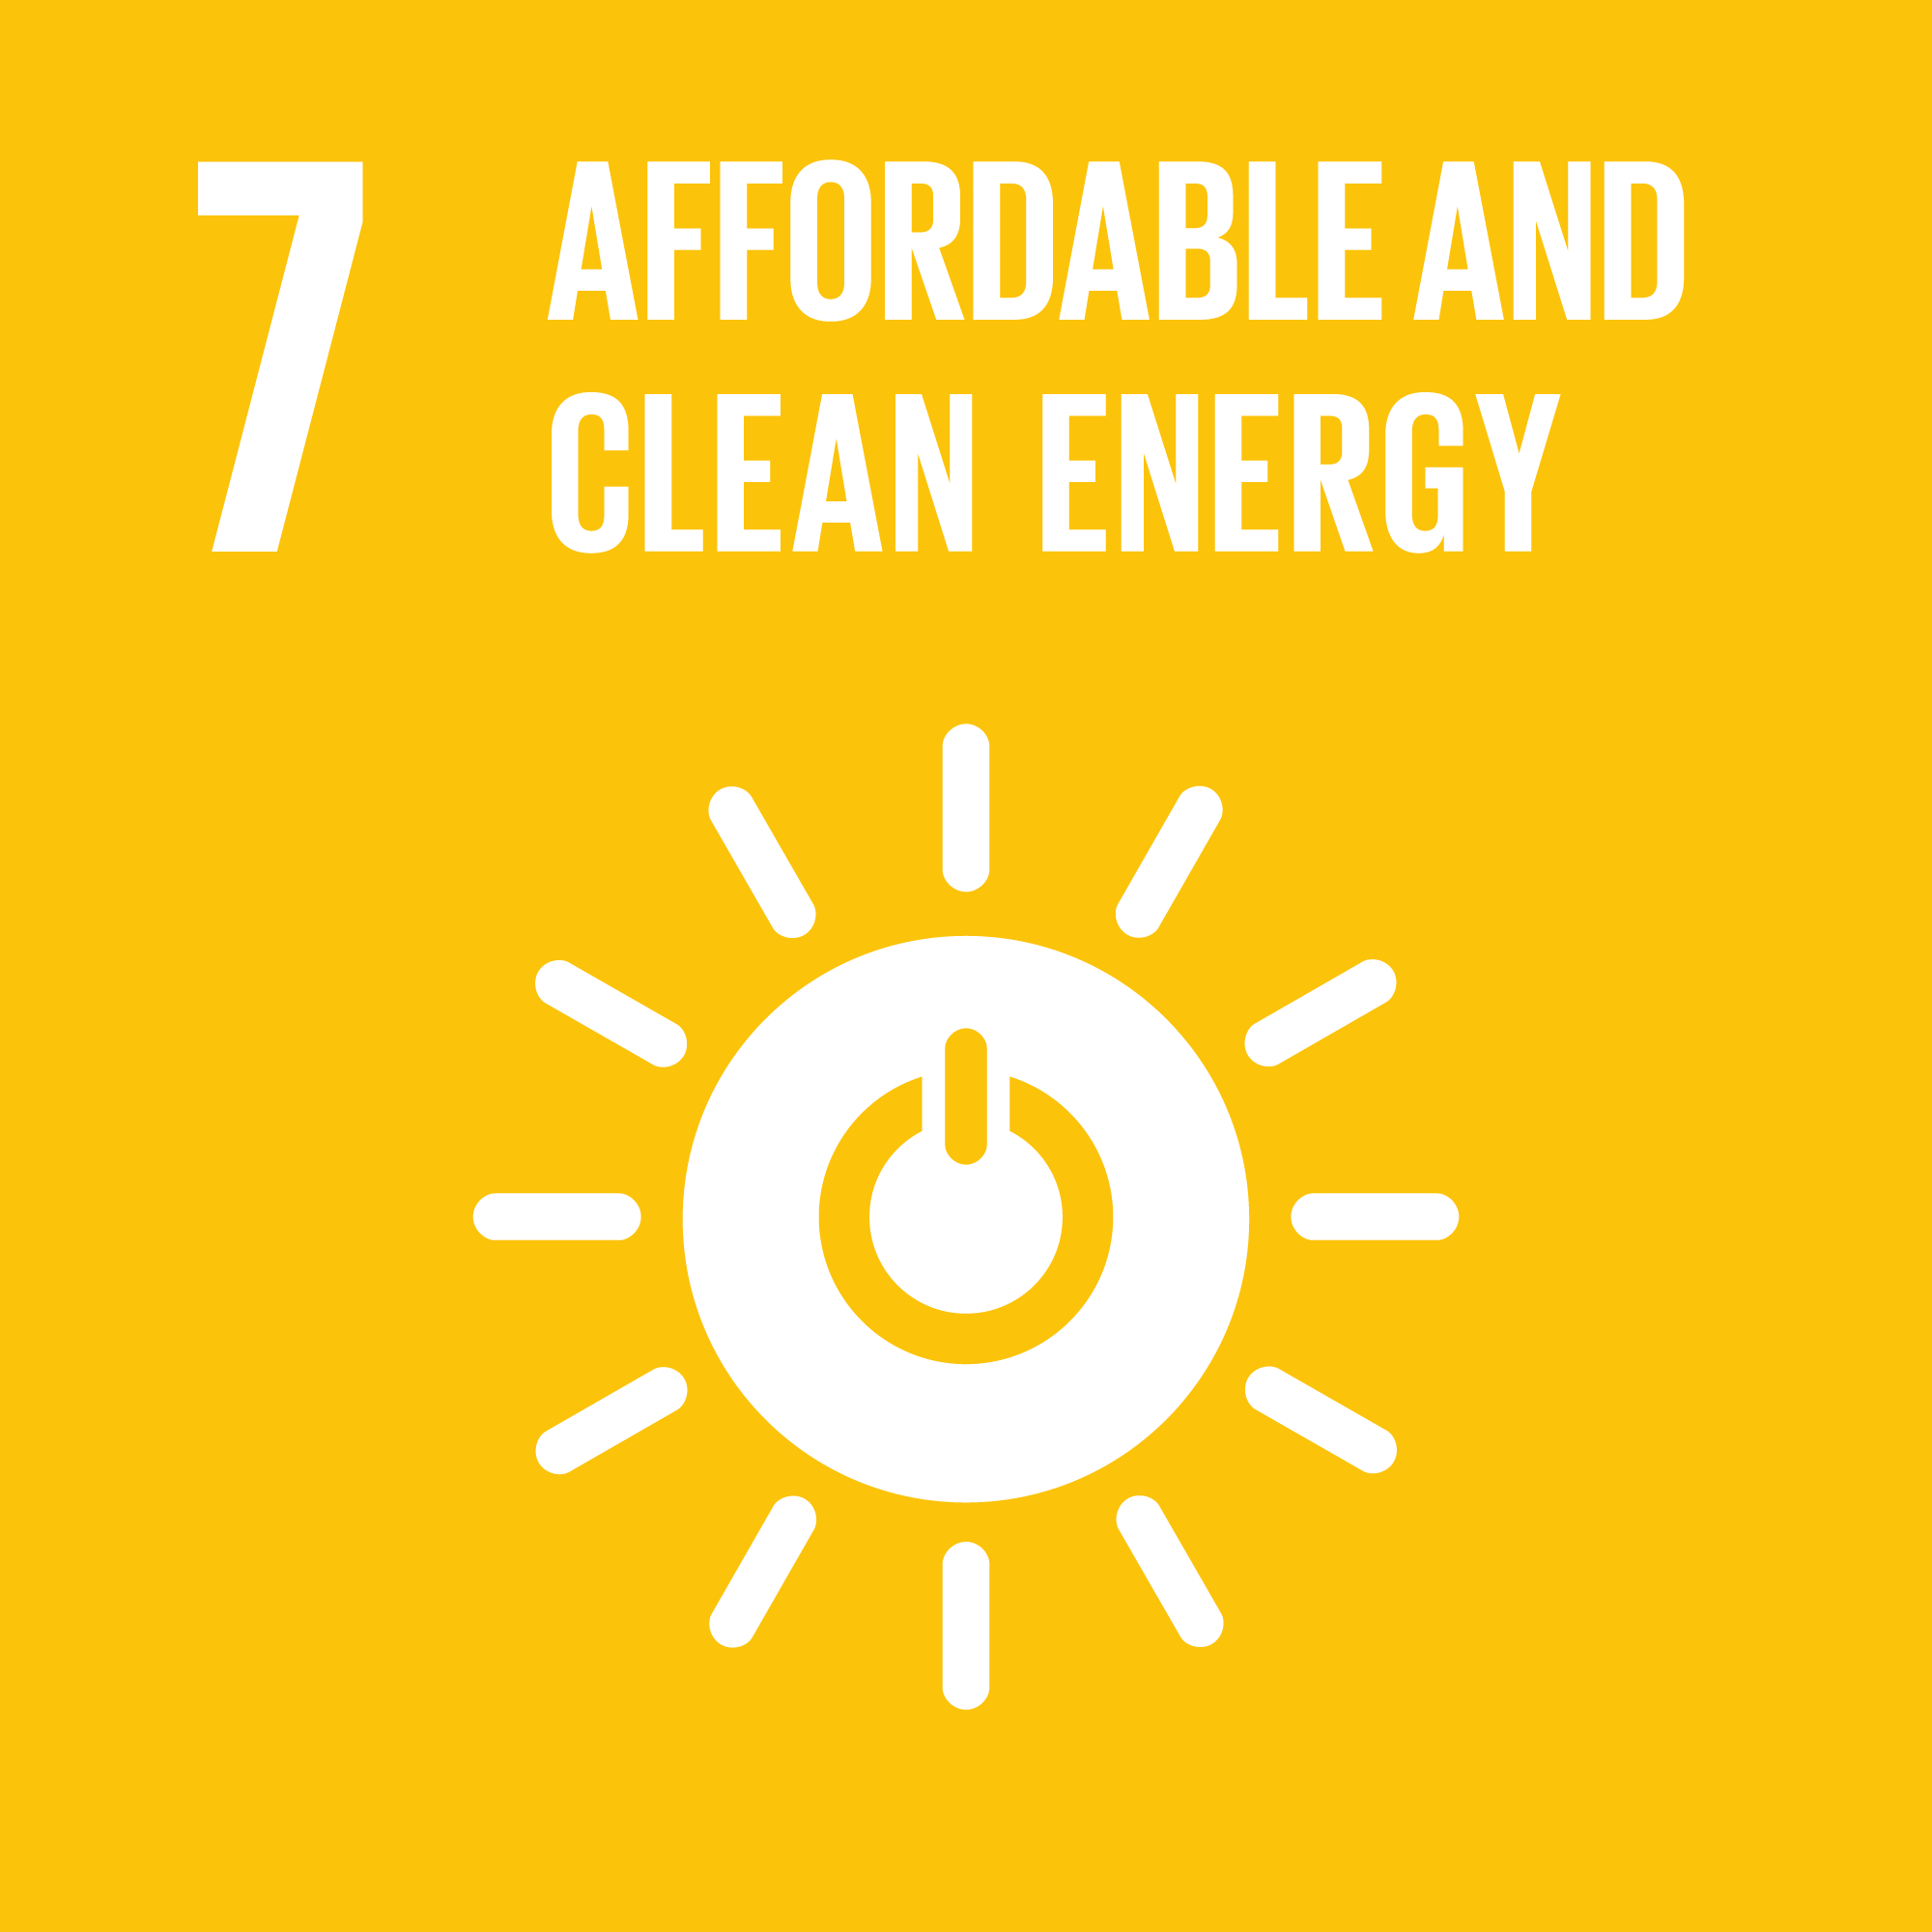 Sustainable Goal 7: Affordable and Clean Energy